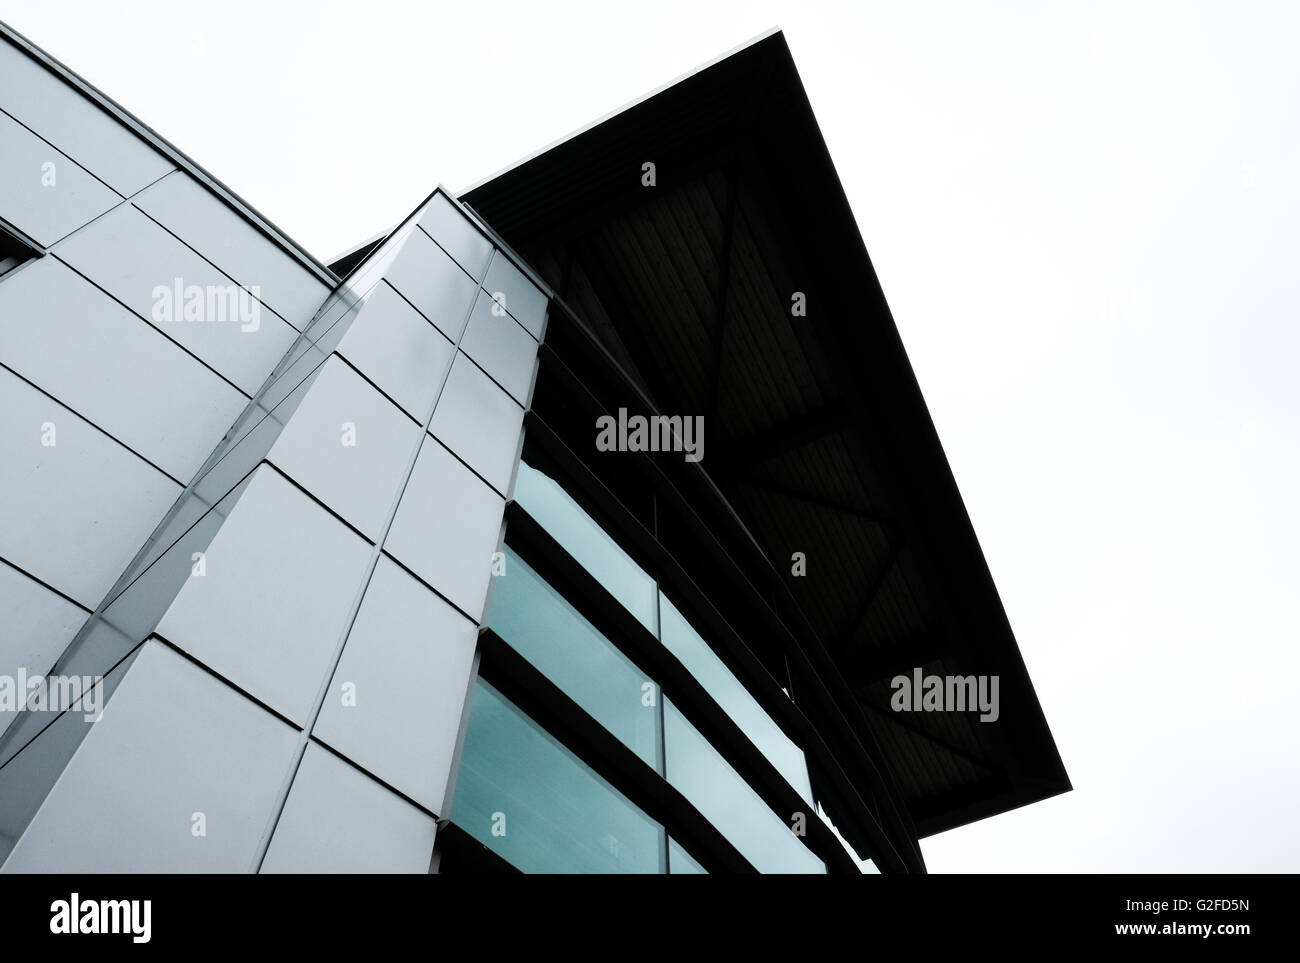 Modern technology centre, seen from multiple angles. Images taken soo after construction. Stock Photo